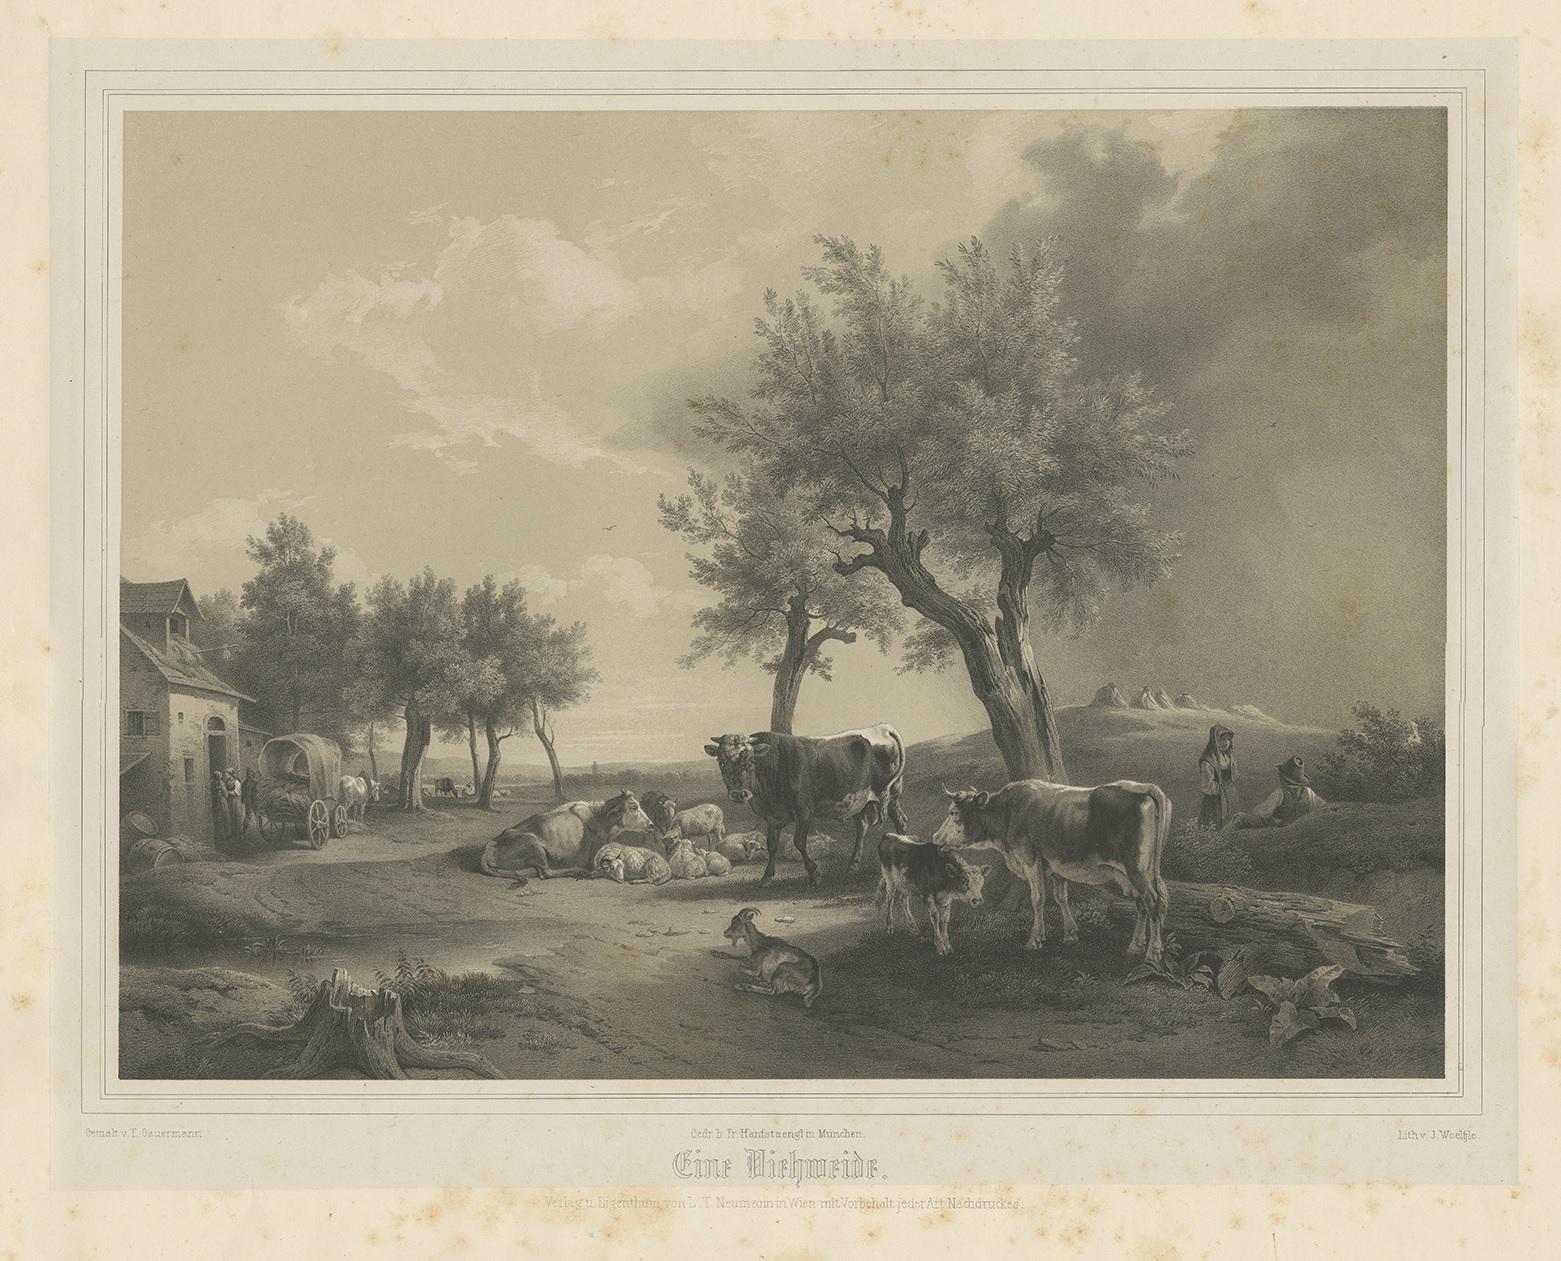 Antique print titled 'Eine Viehweide'. Large, original antique print on chine collé of a pasture with cattle. Lithographed after a painting by Gauermann. Published by Neumann, circa 1860.